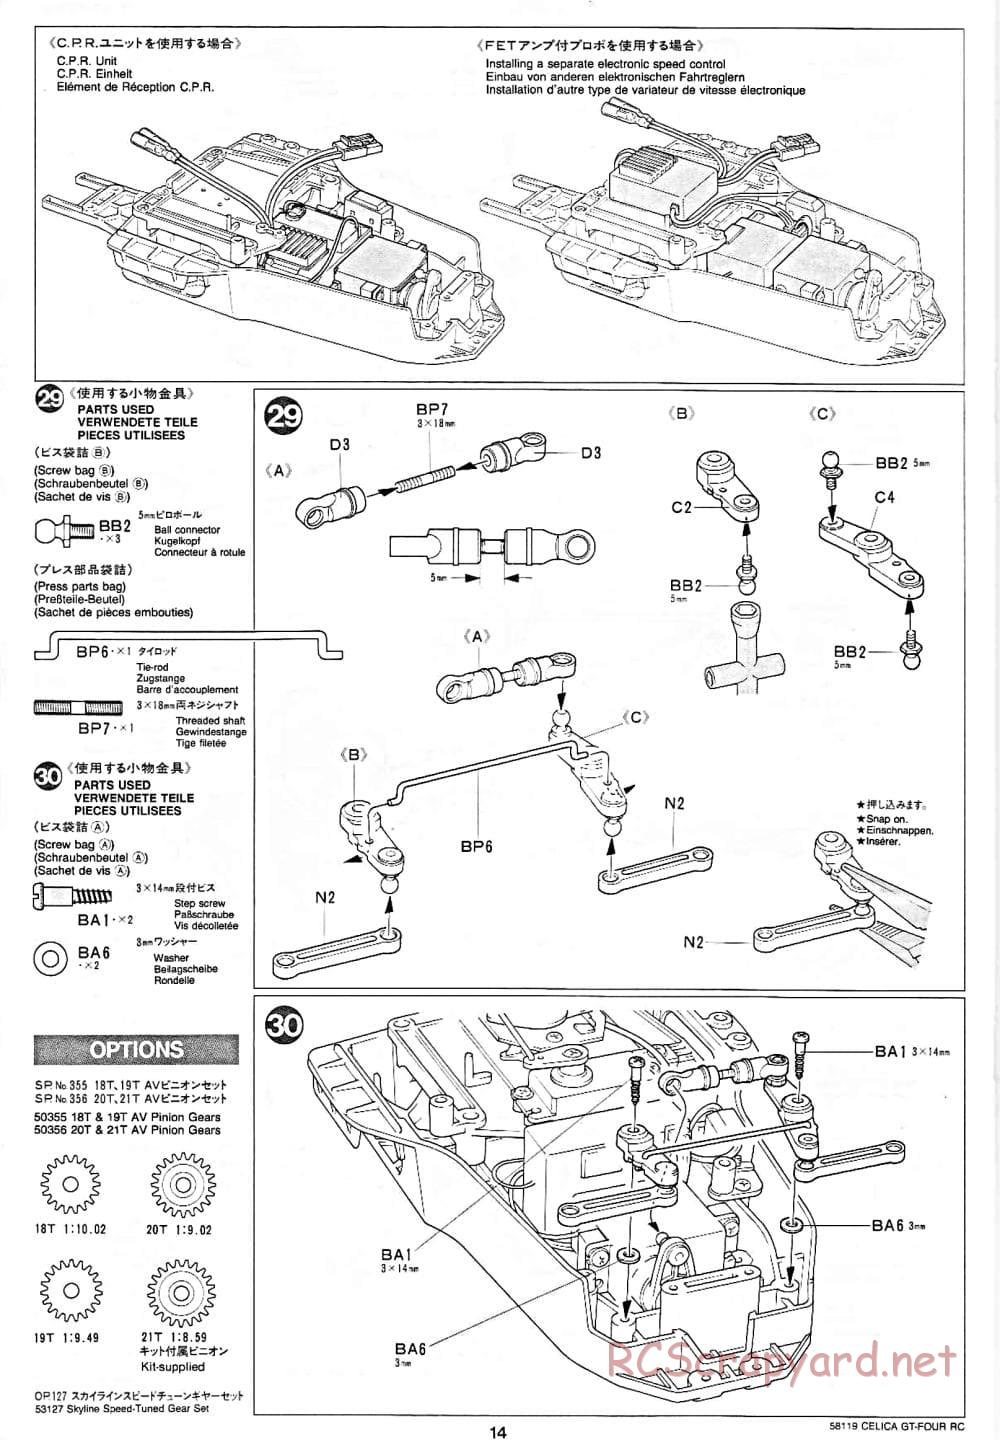 Tamiya - Toyota Celica GT-Four RC - TA-01 Chassis - Manual - Page 14